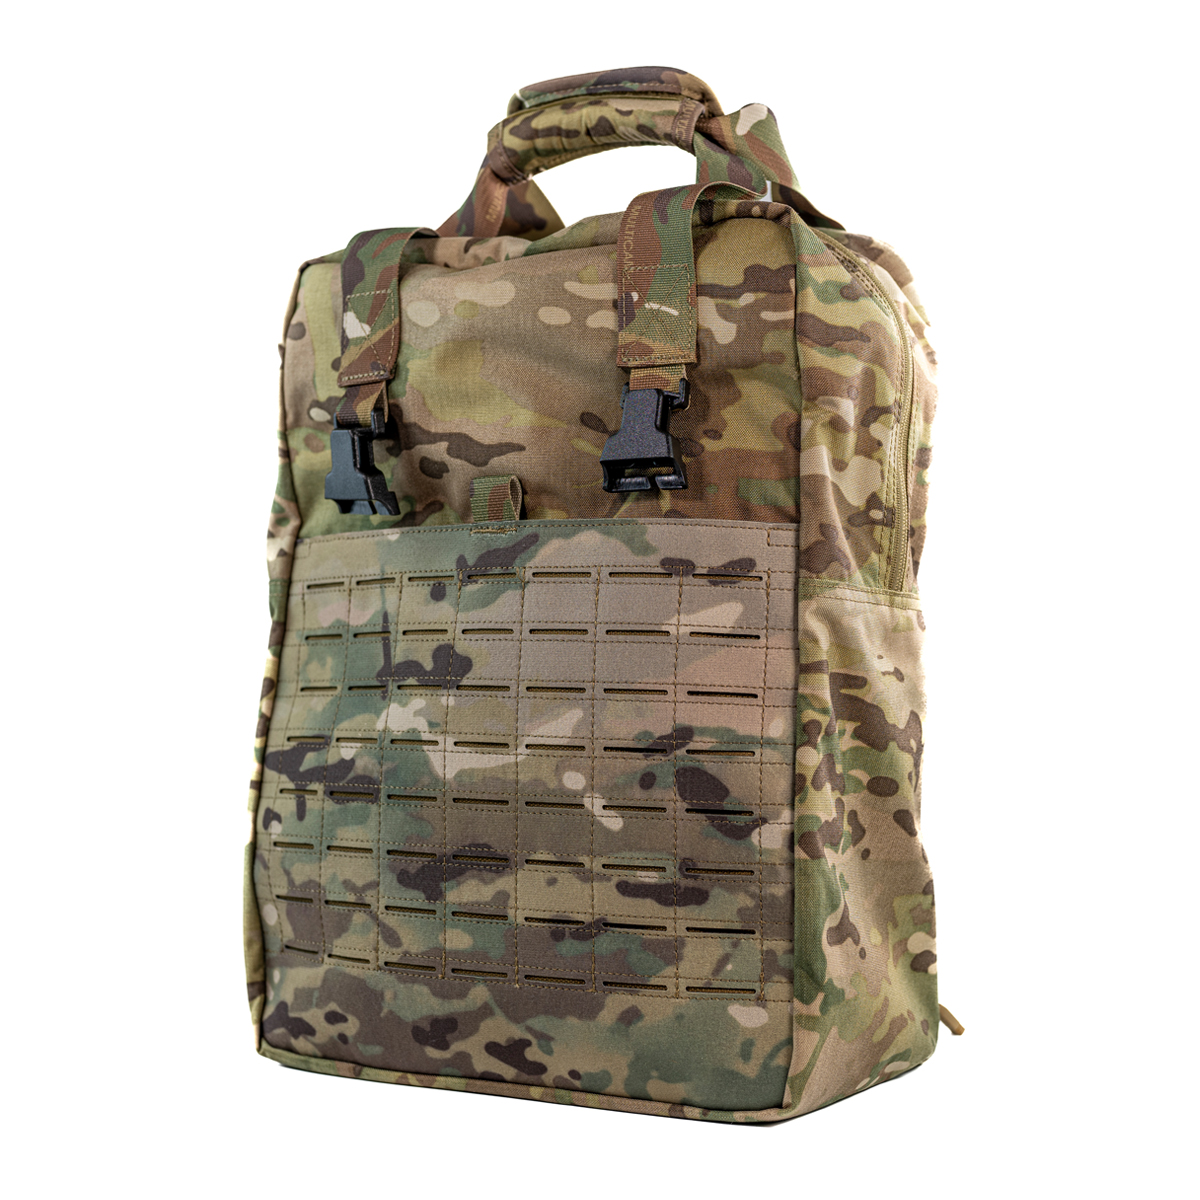 Molle Army Carry side bag Tactical Gun Range utility backpack